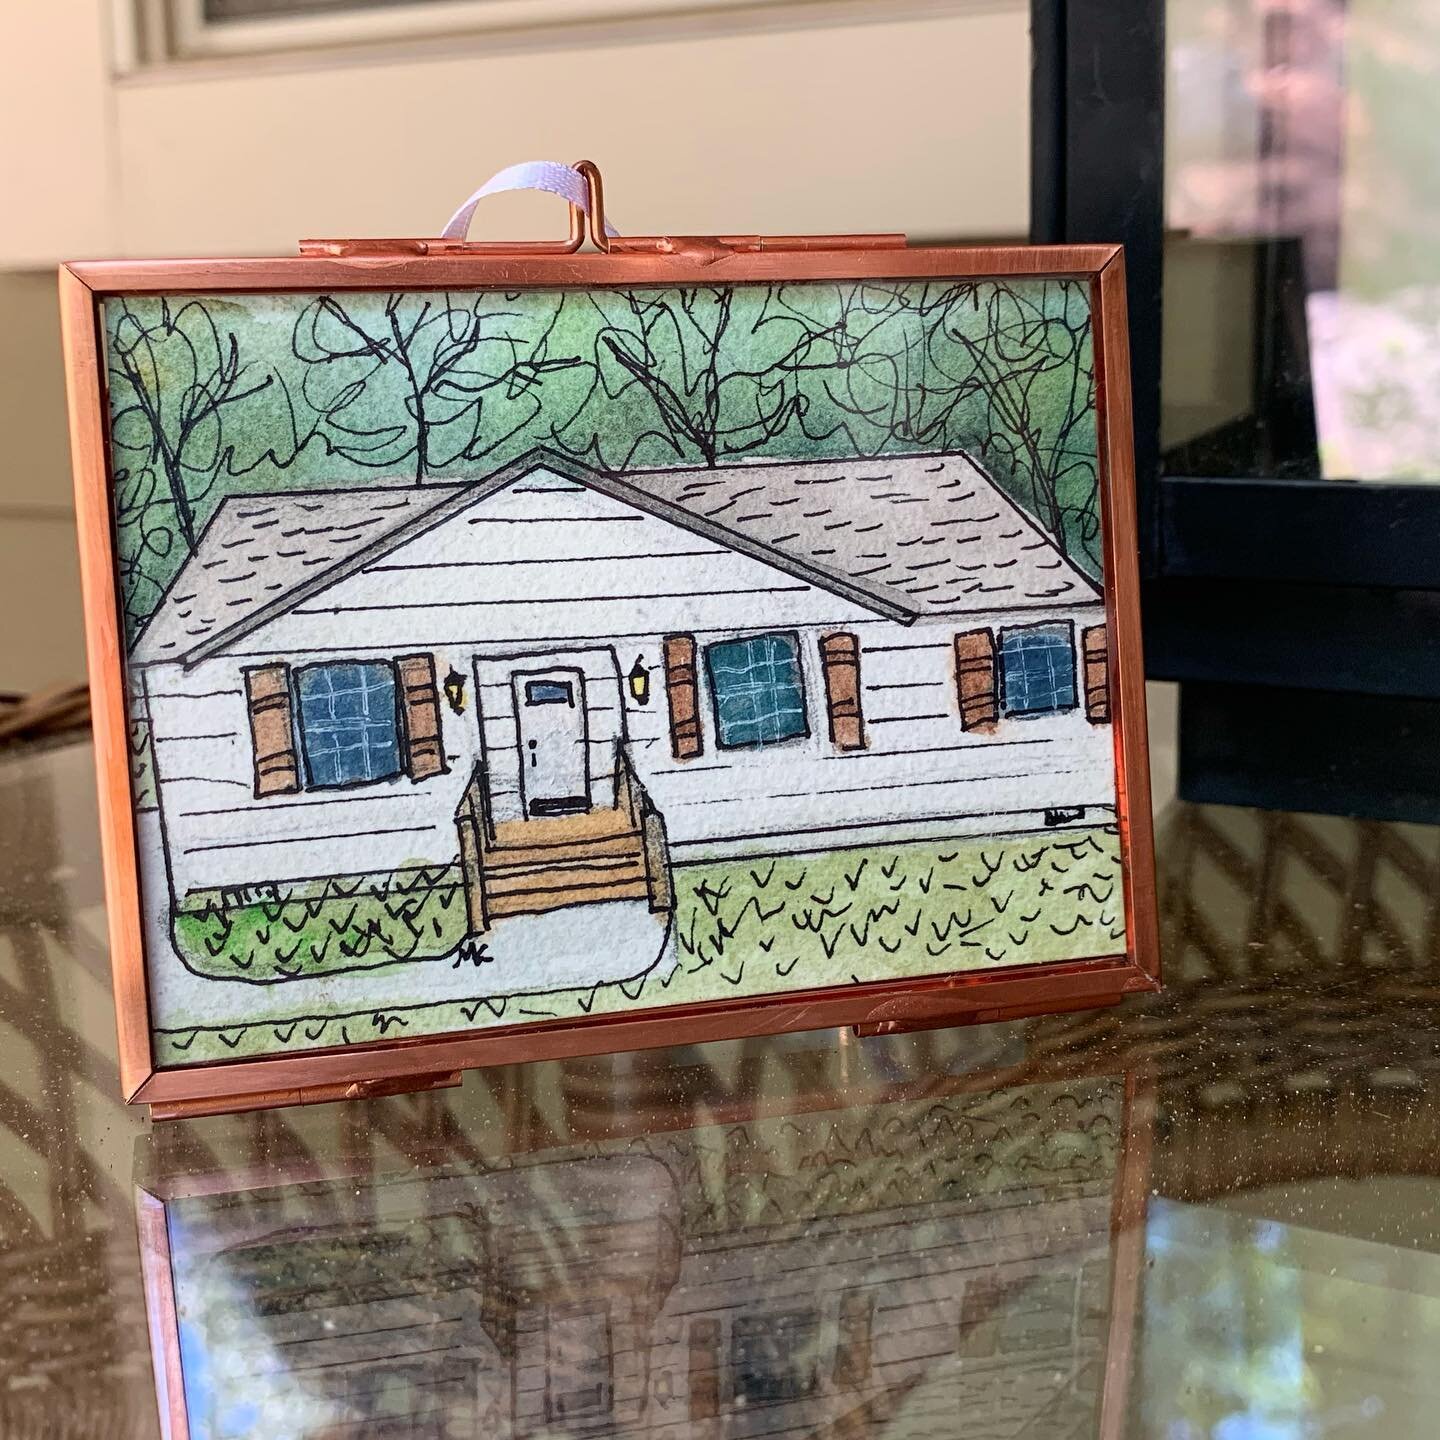 Happy Friday! How do you plan to spend the holiday weekend? #houseportrait #realtorgifts #miniwatercolor #watercolorpainting #watercolorillustration #homesweethome #home #chattanoogaartist #tennesseeart #tennesseehomes #georgiahomes #noogamade #chatt